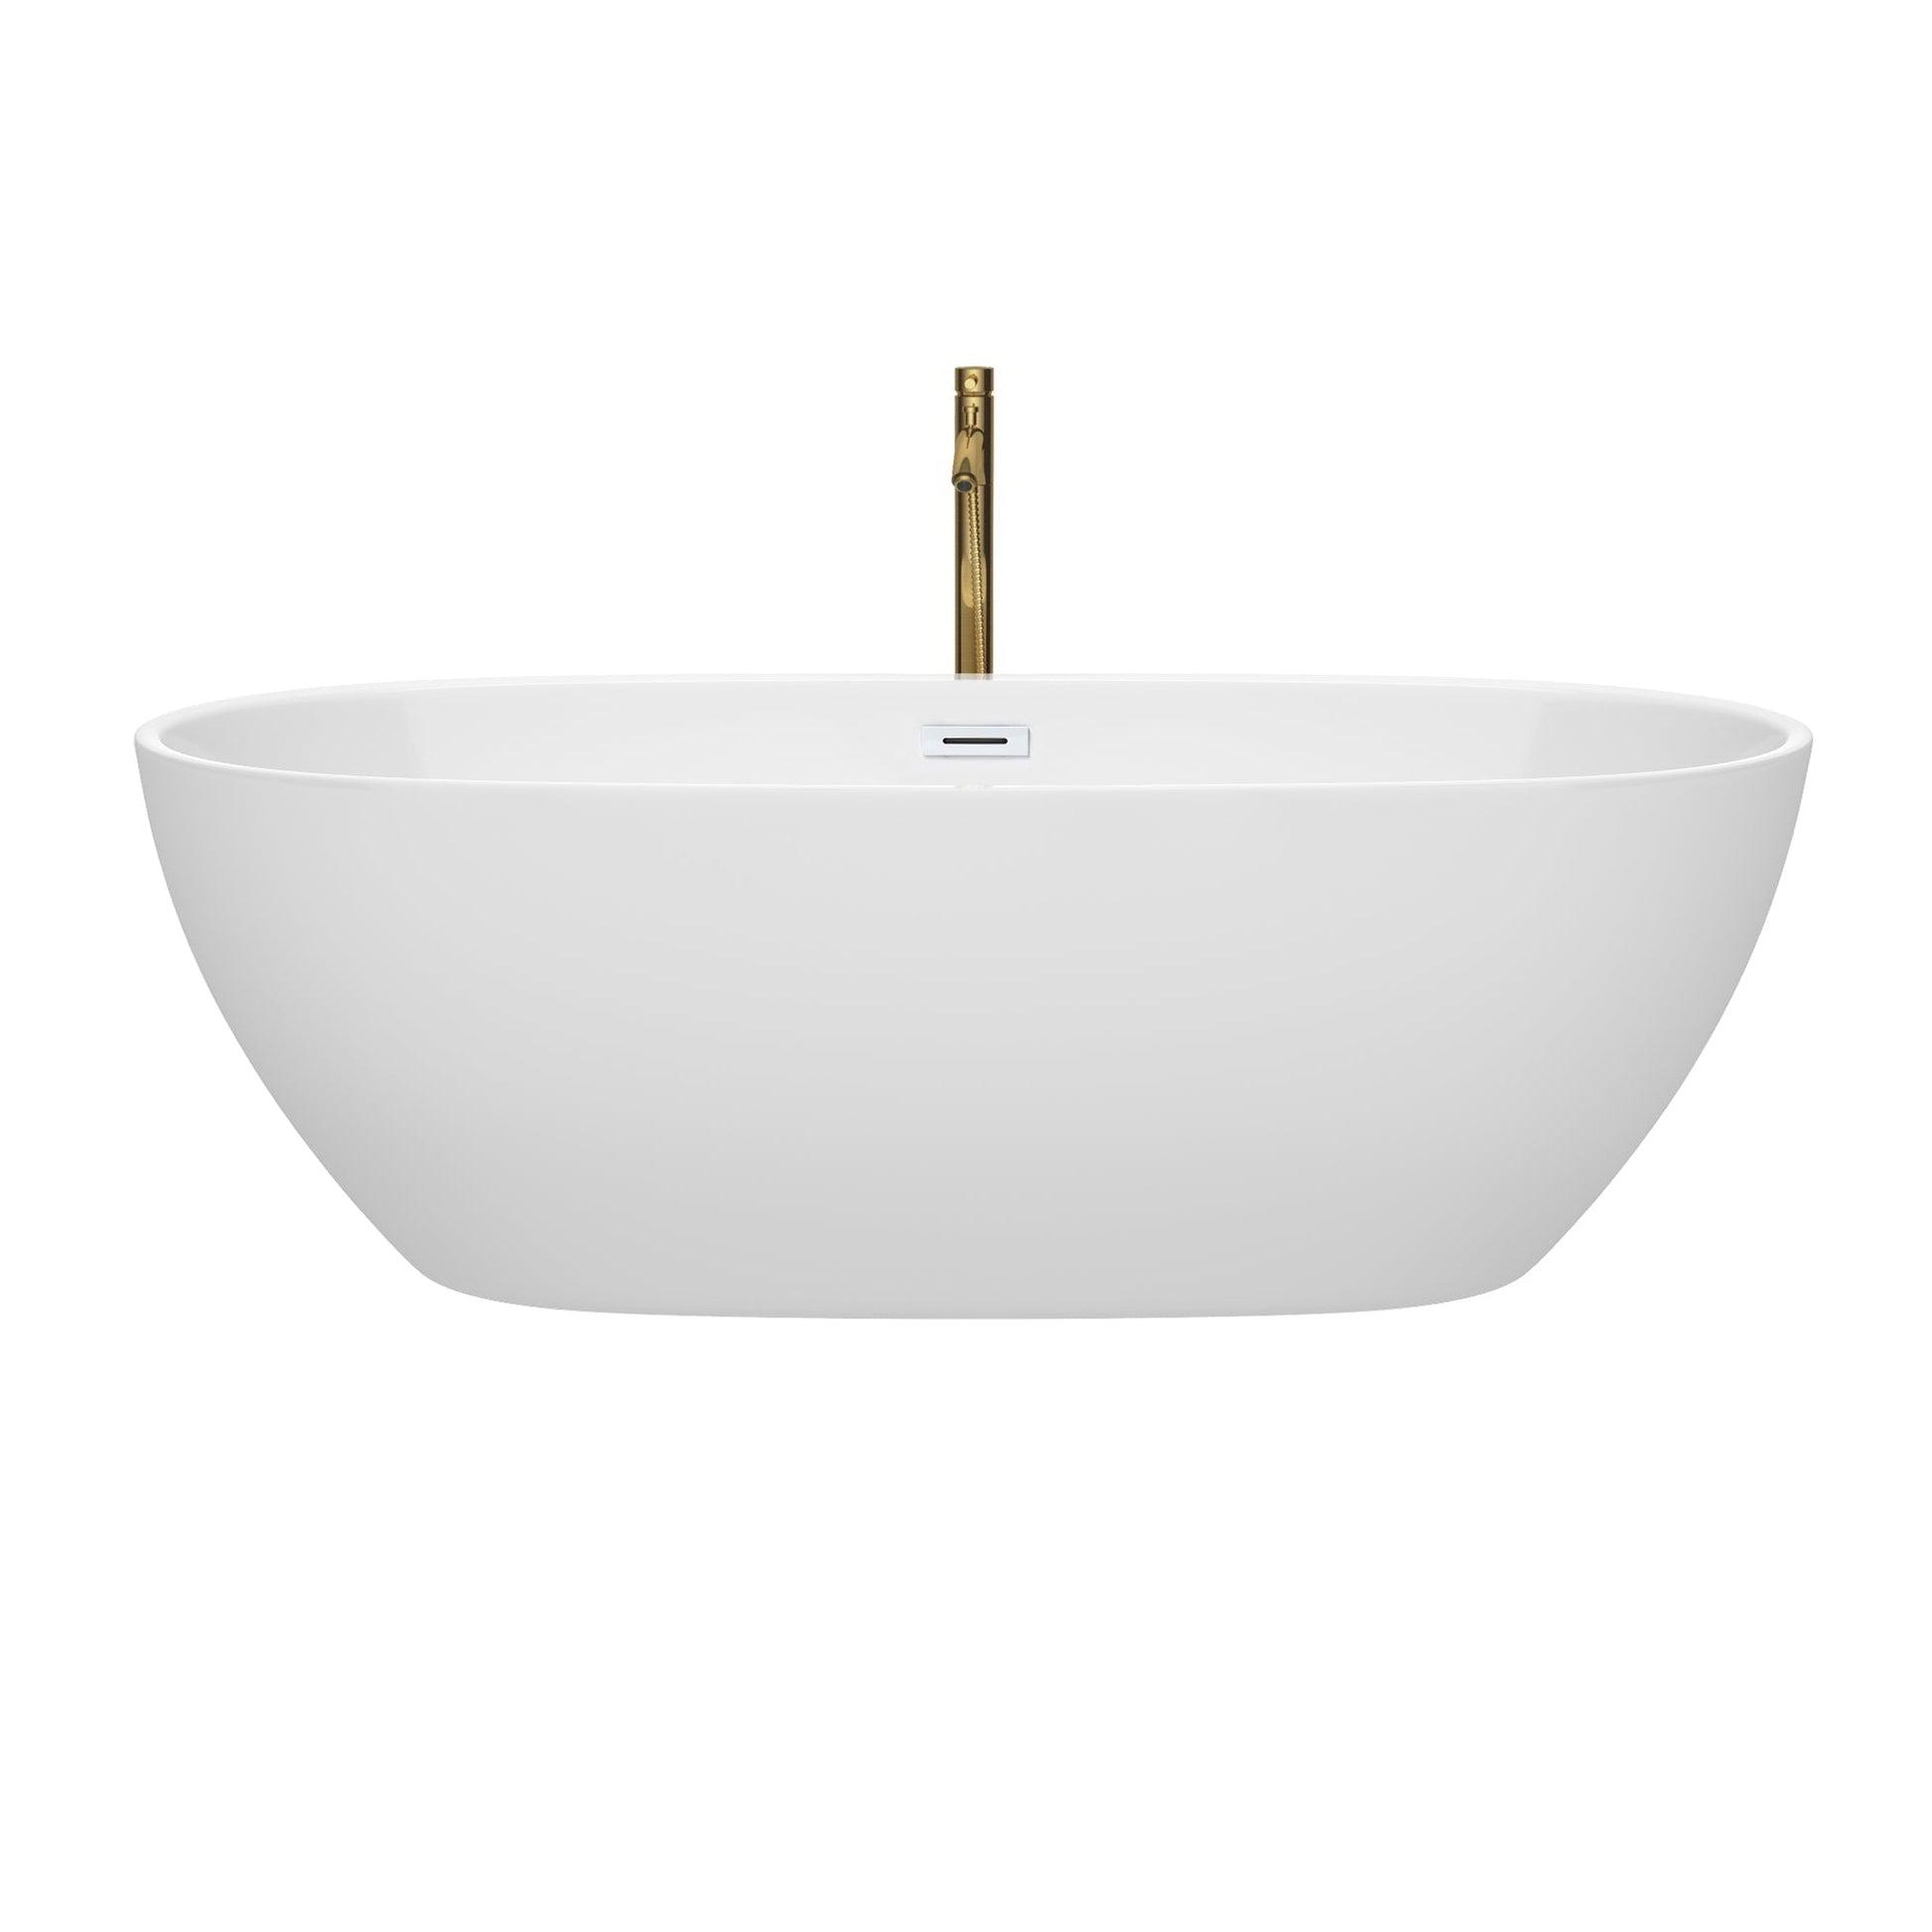 Wyndham Collection Juno 71" Freestanding Bathtub in White With Shiny White Trim and Floor Mounted Faucet in Brushed Gold